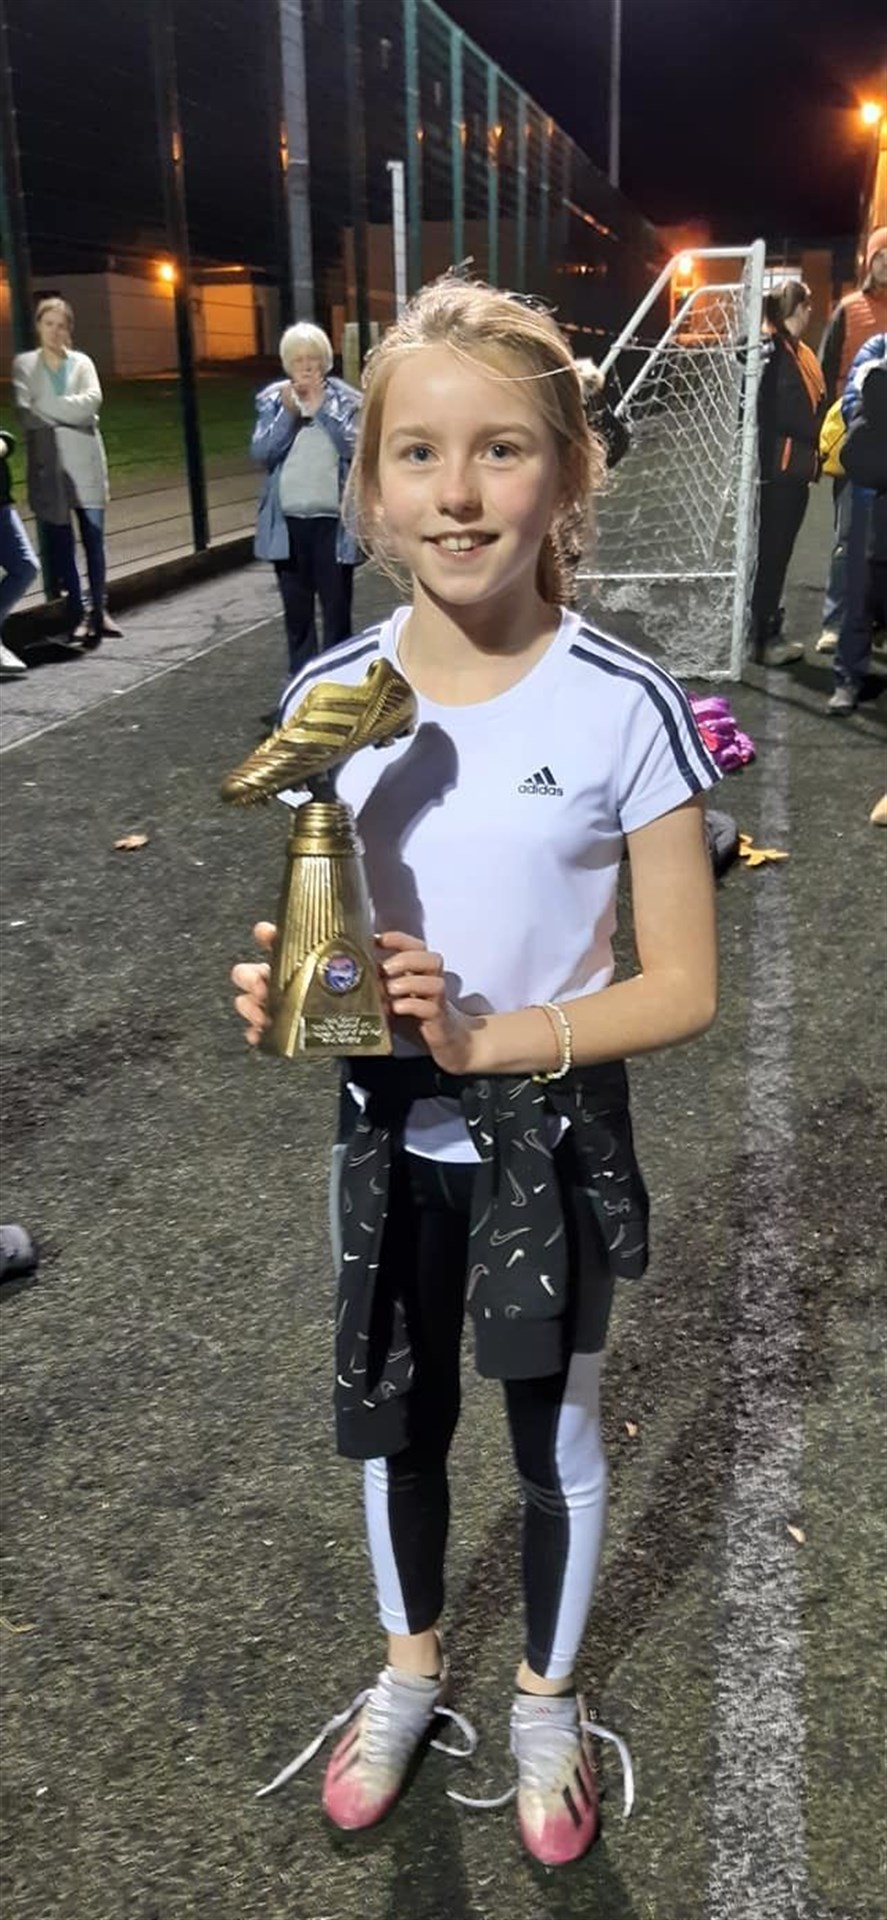 Alex Quigley was Ross County girls' under-11 players' player of the year.